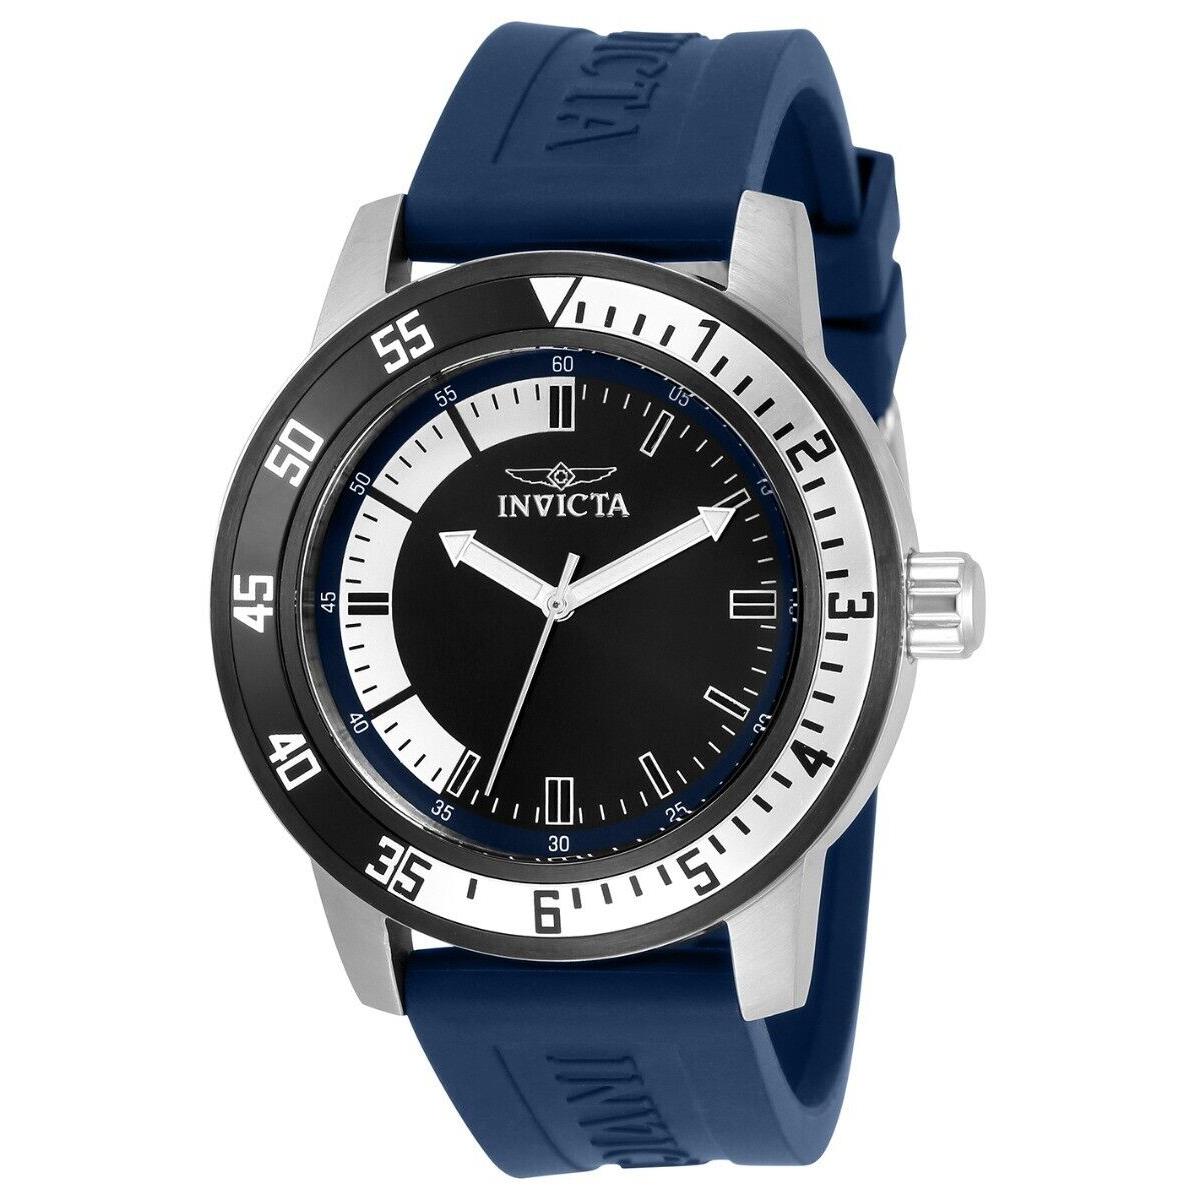 Invicta Specialty Men`s Watch - 45mm Blue 34013 - Dial: White, Black, Blue, Band: strong blue